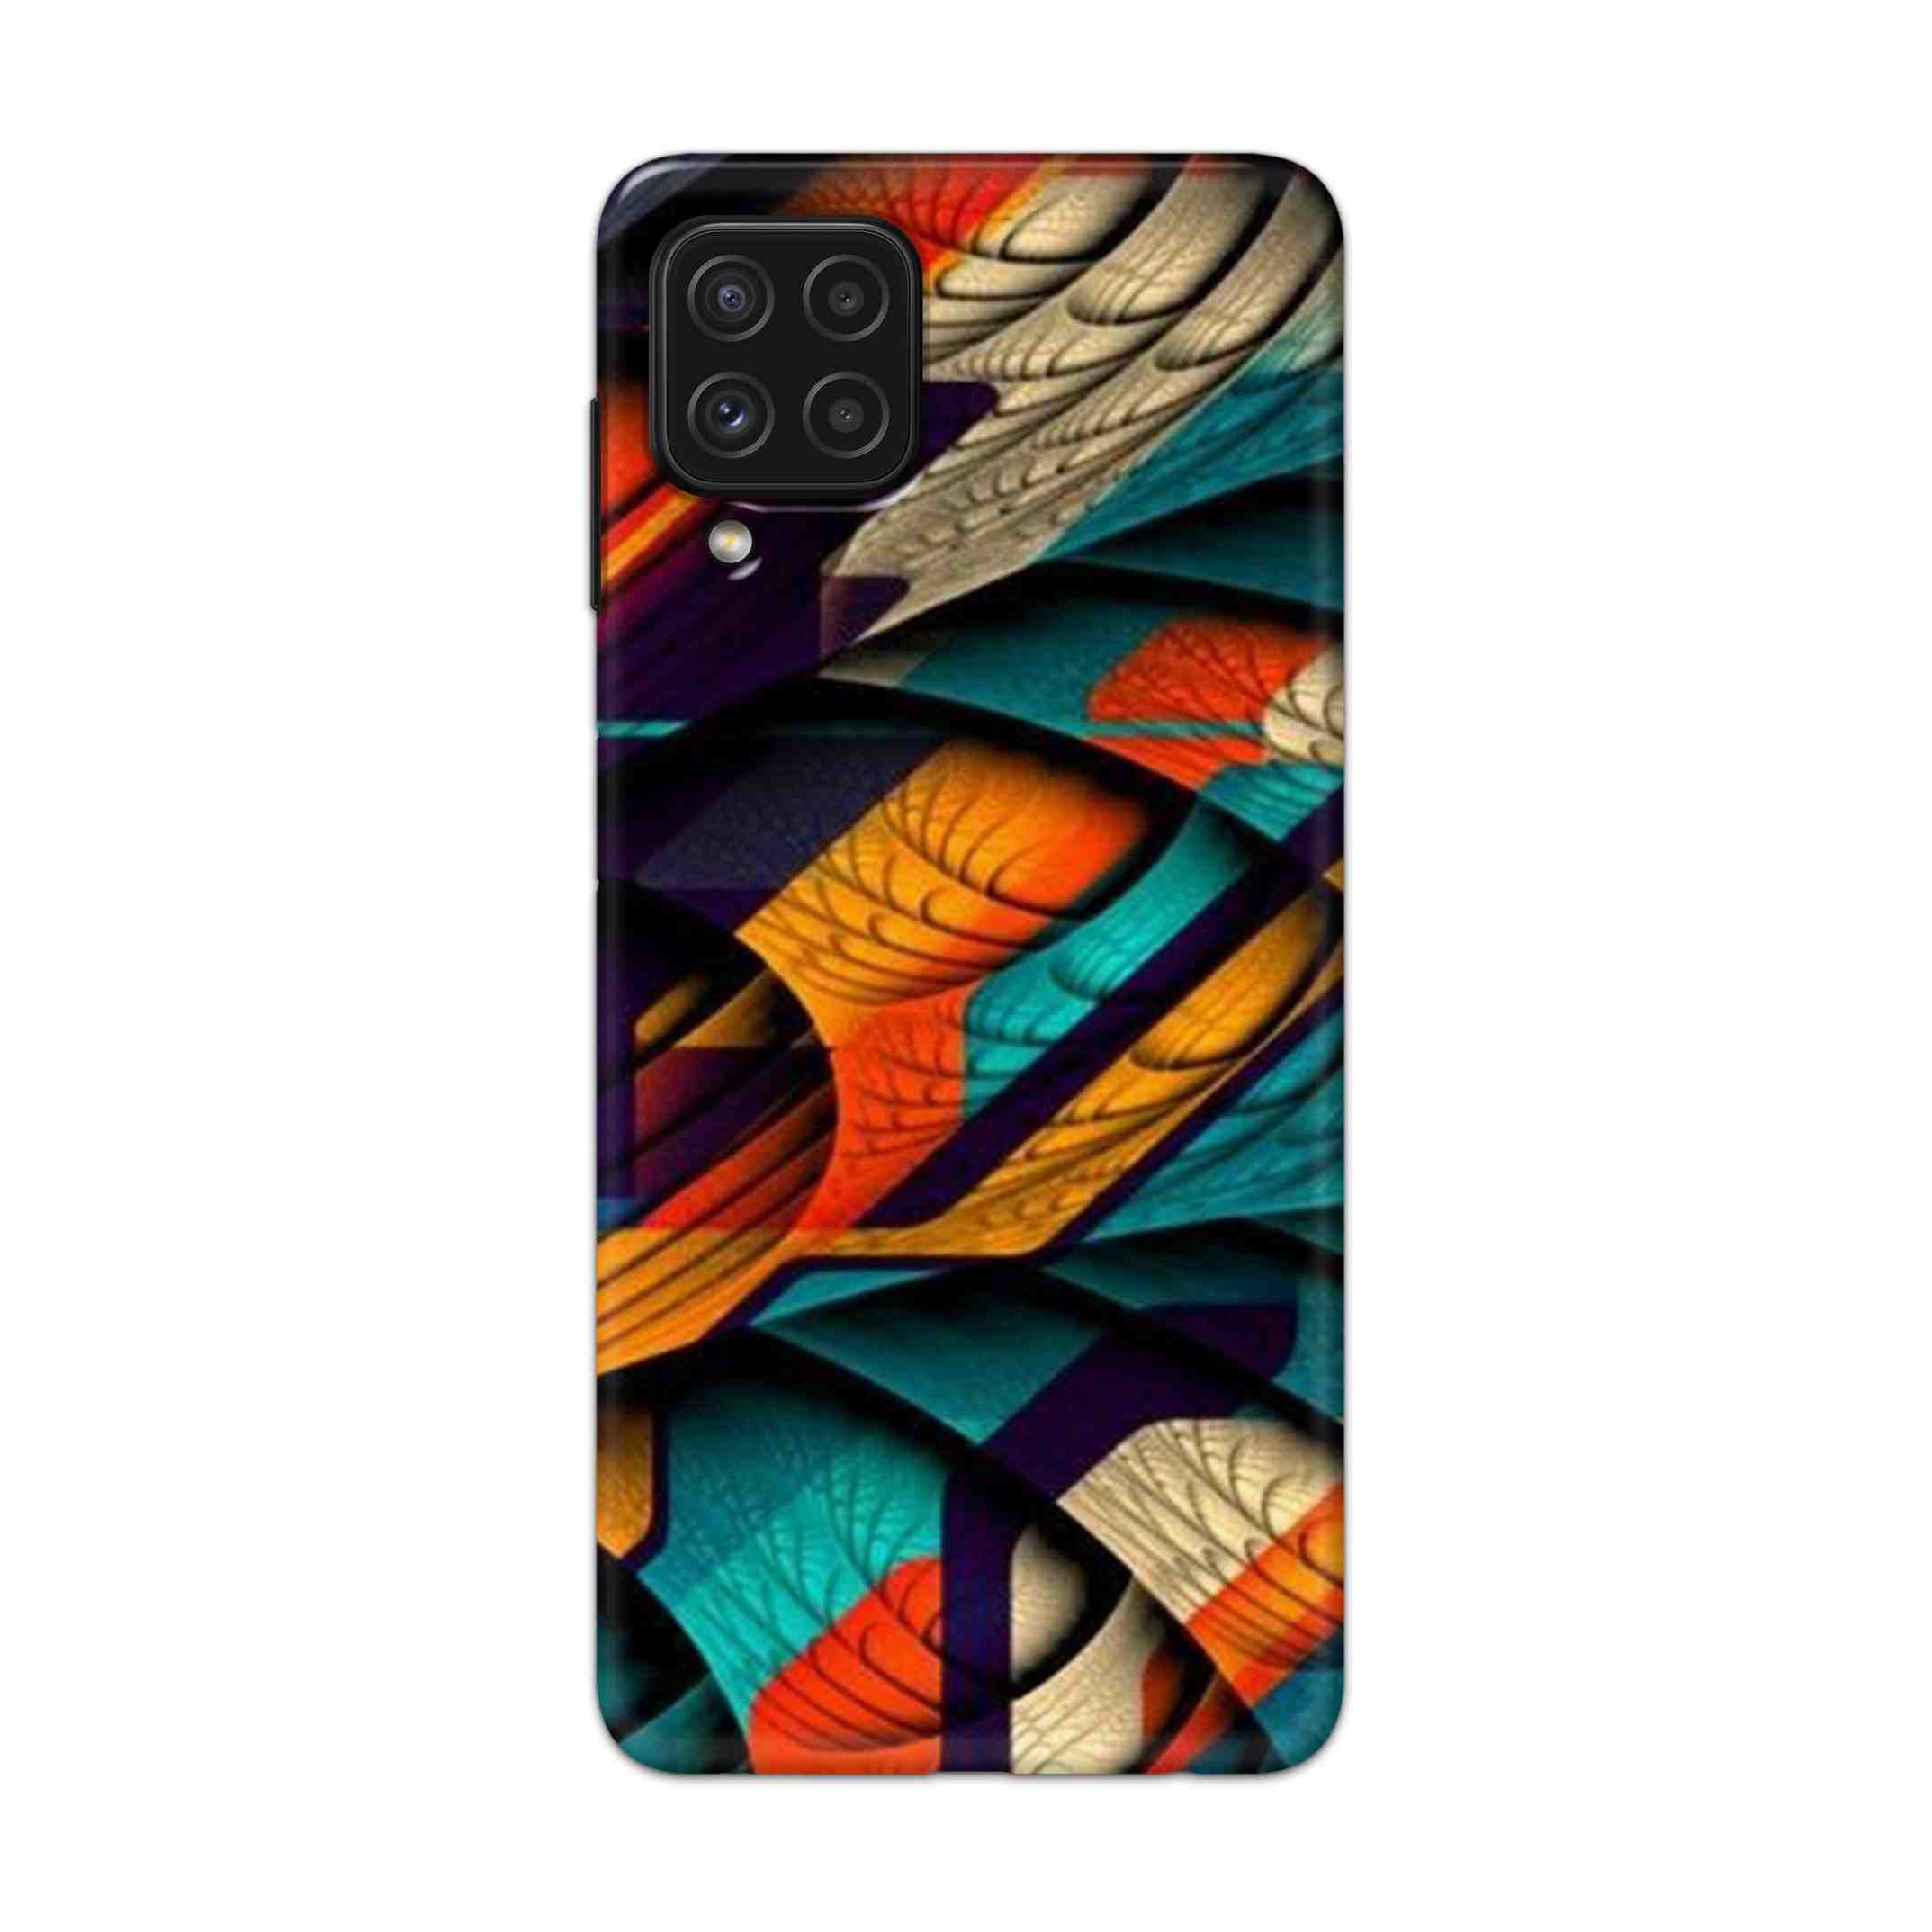 Buy Colour Abstract Hard Back Mobile Phone Case Cover For Samsung Galaxy A22 Online